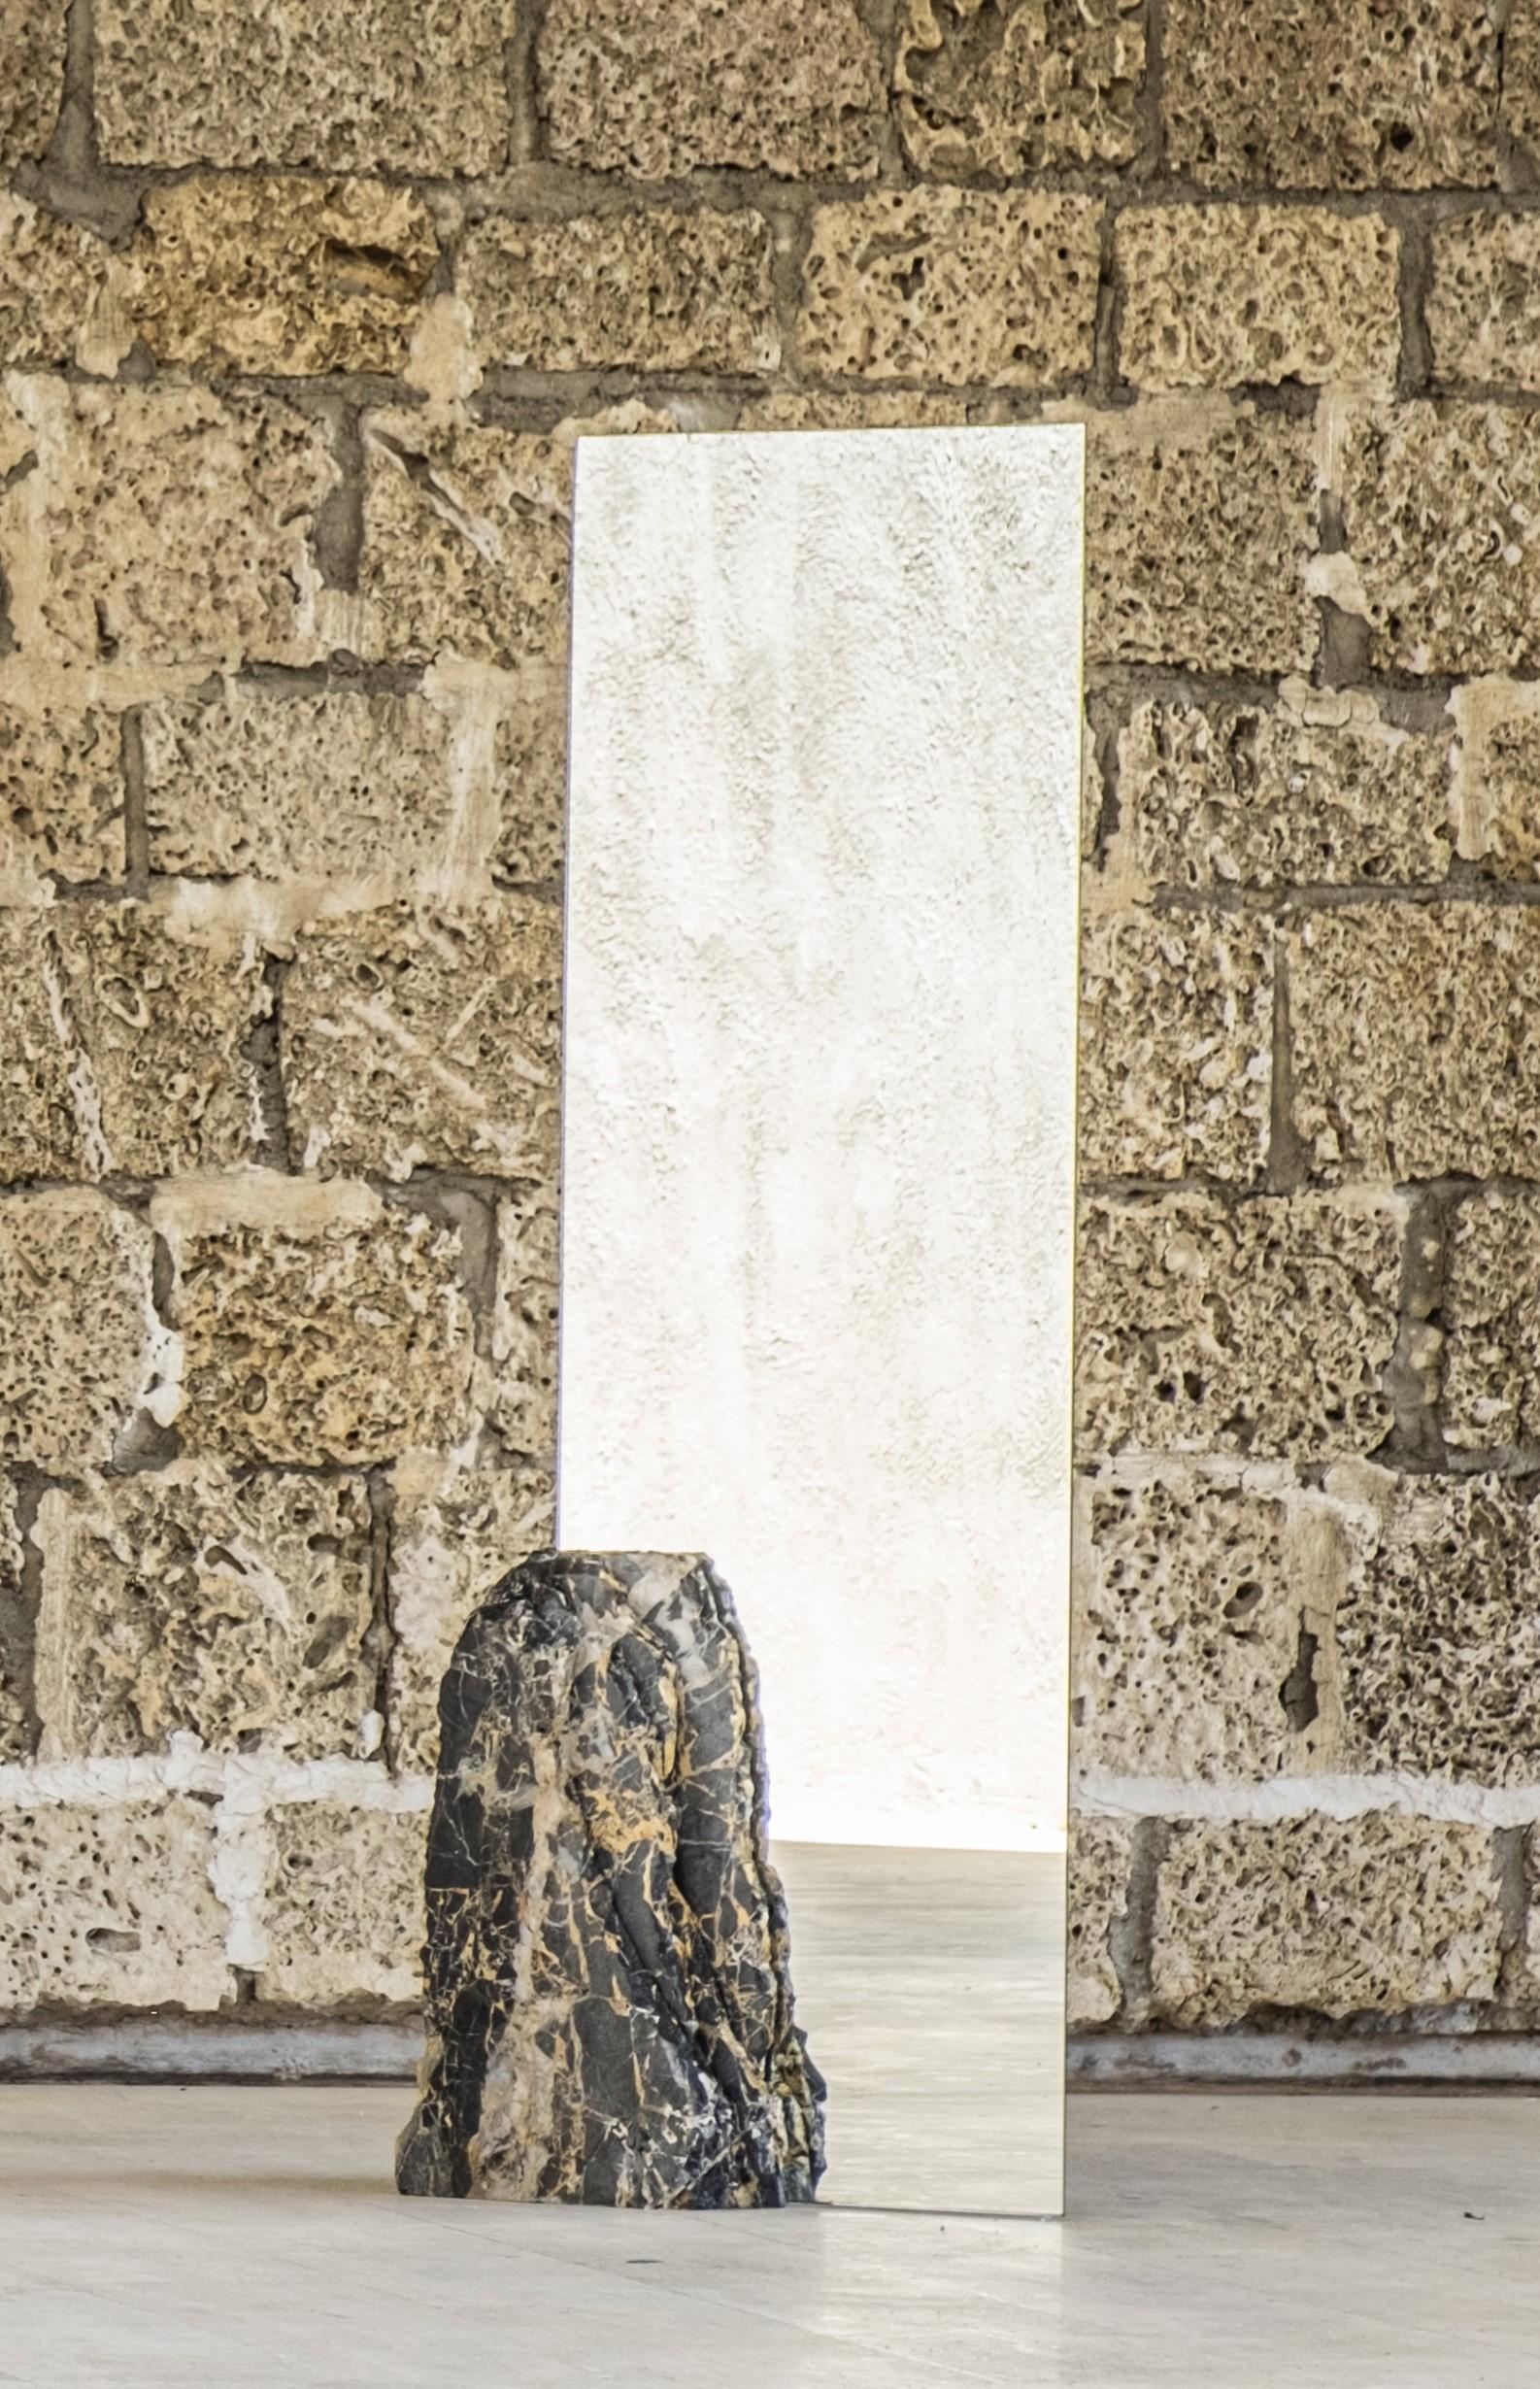 Tempus mirror by Andres Monnier
One of a Kind.
Dimensions: W 35 x L 70 x H 190 cm
Materials: Portoro black marble.
Stone options available: grey, black and white marble, natural and red travertine, volcanic, basalt, granite rock, onyx,